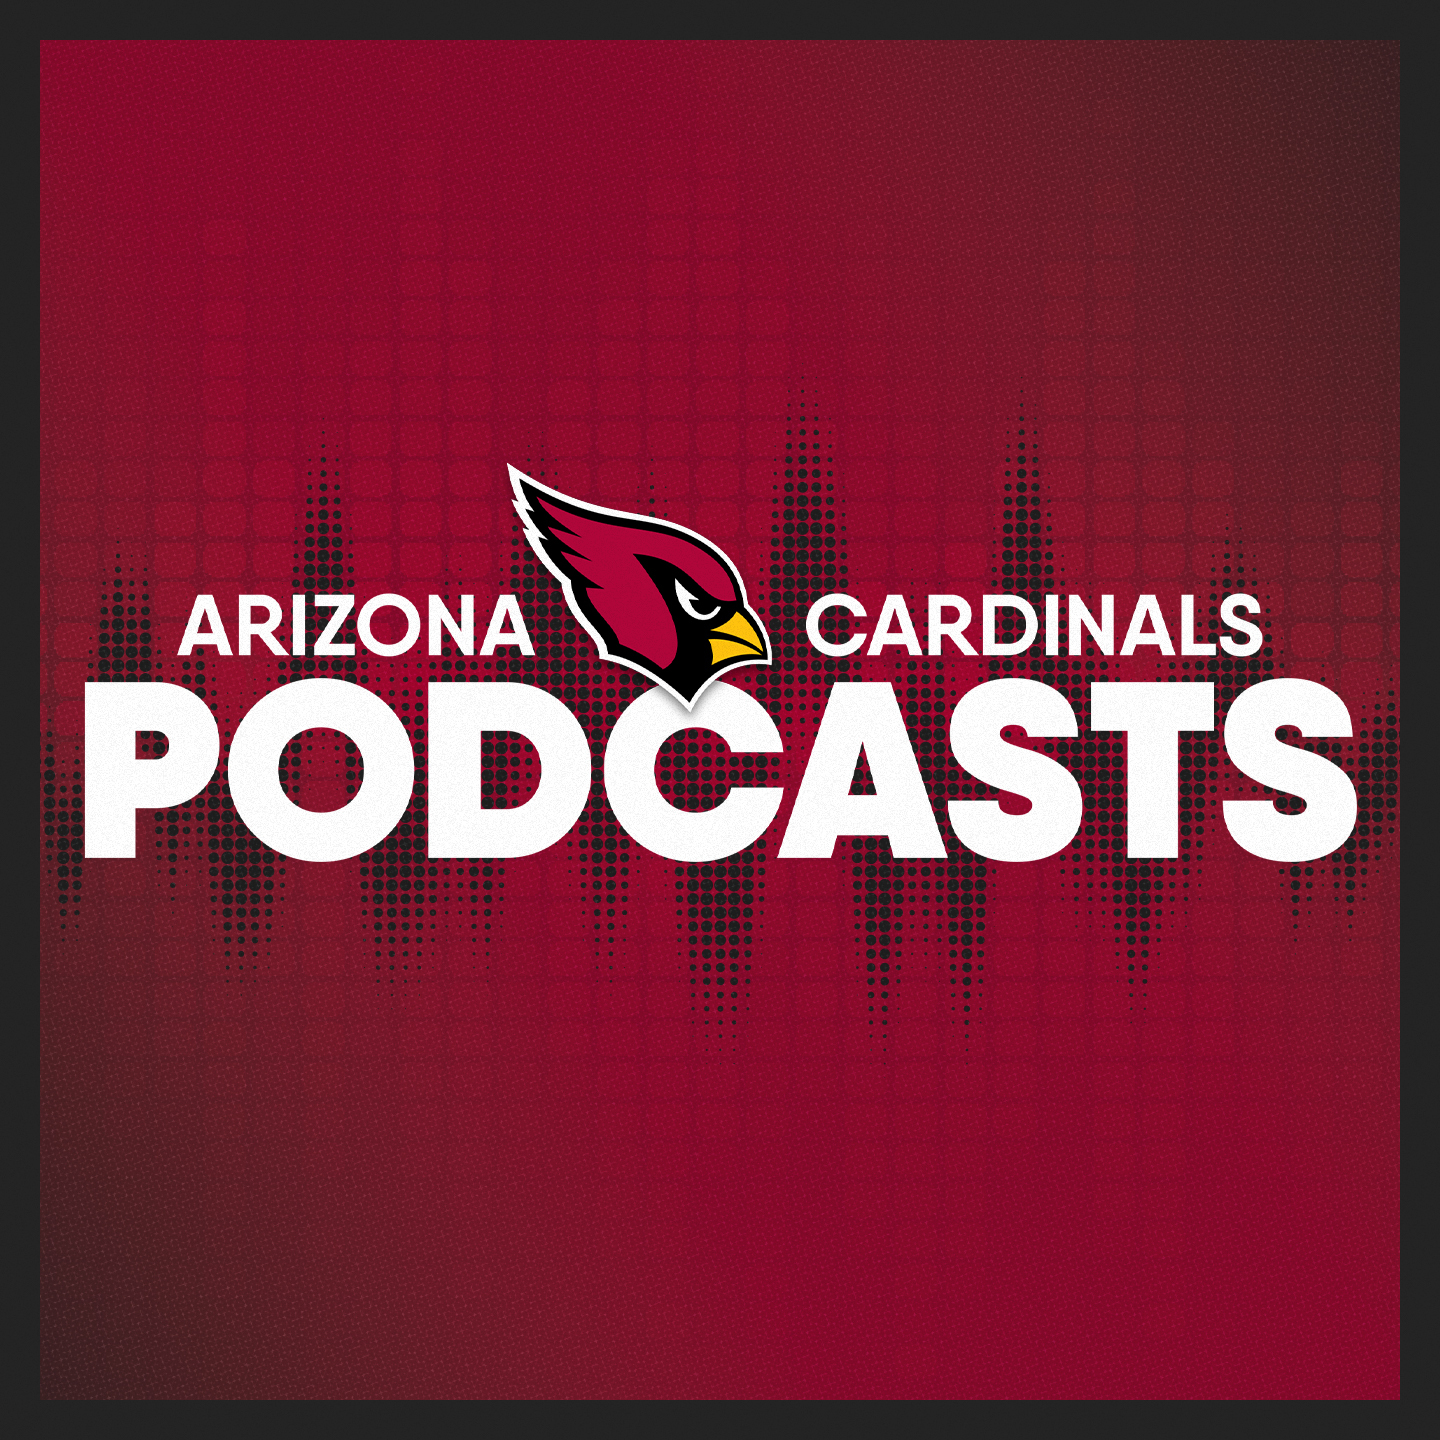 Cardinals Cover 2 - Be Better At Home